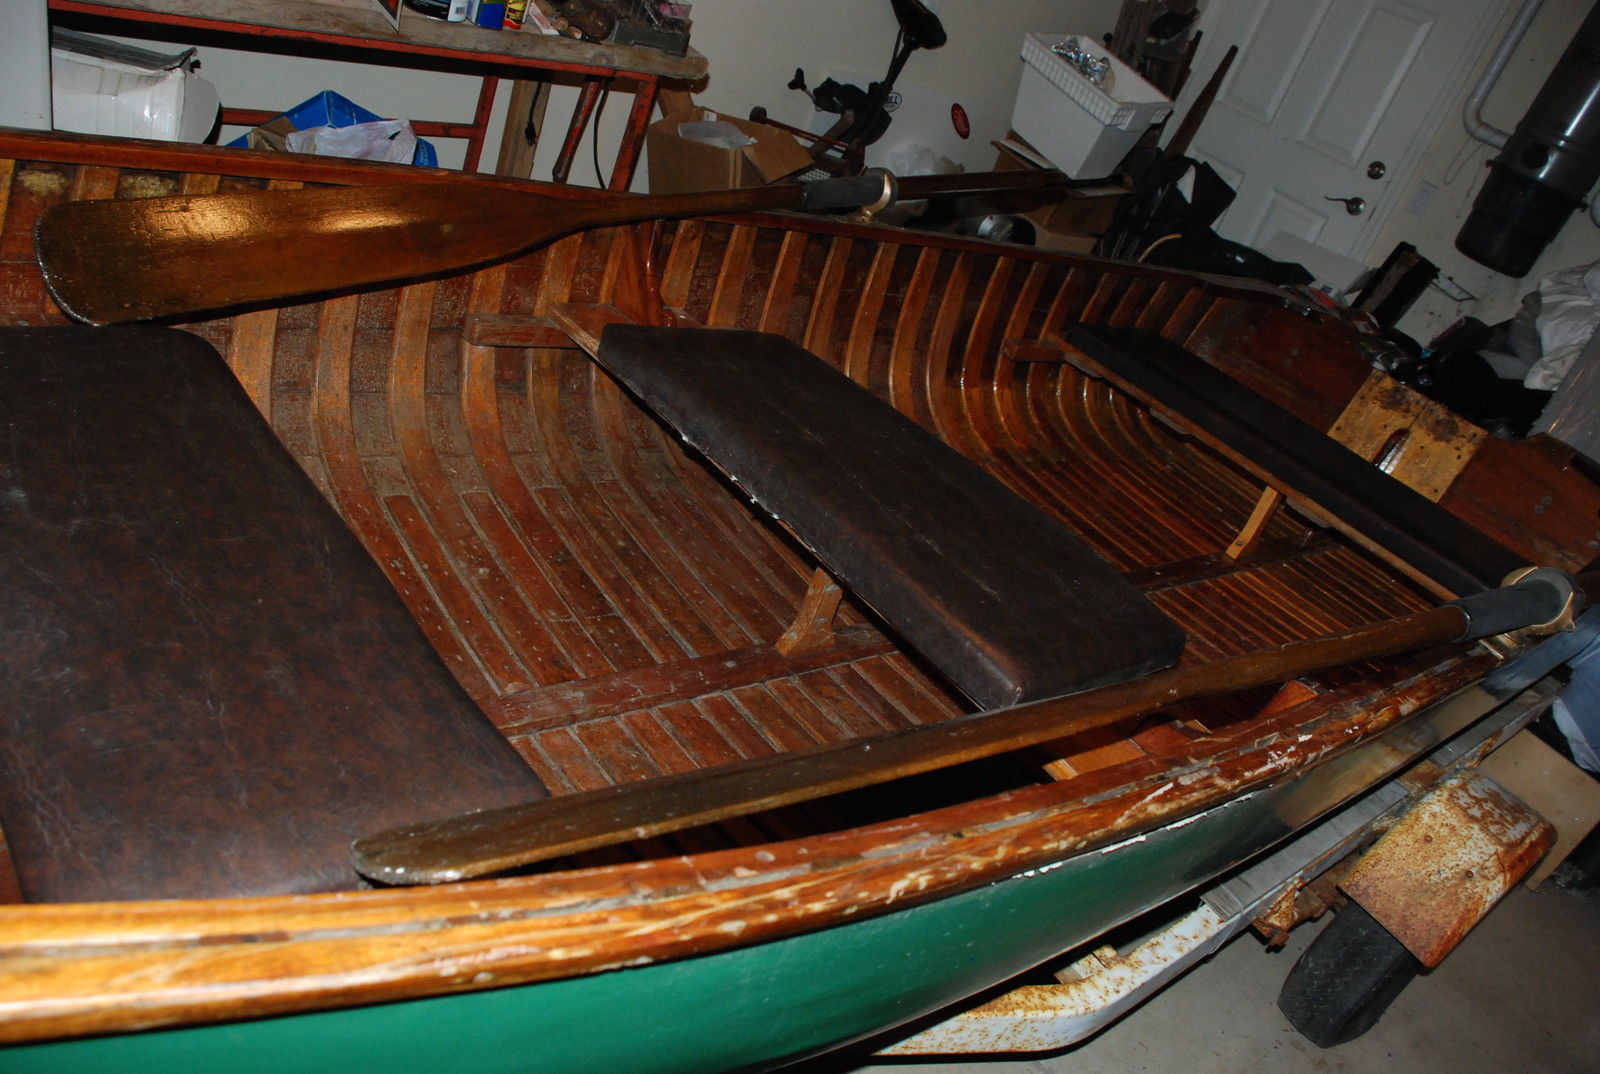 OLD TOWN Runabout Row Boat 1951 for sale for $700 - Boats ...